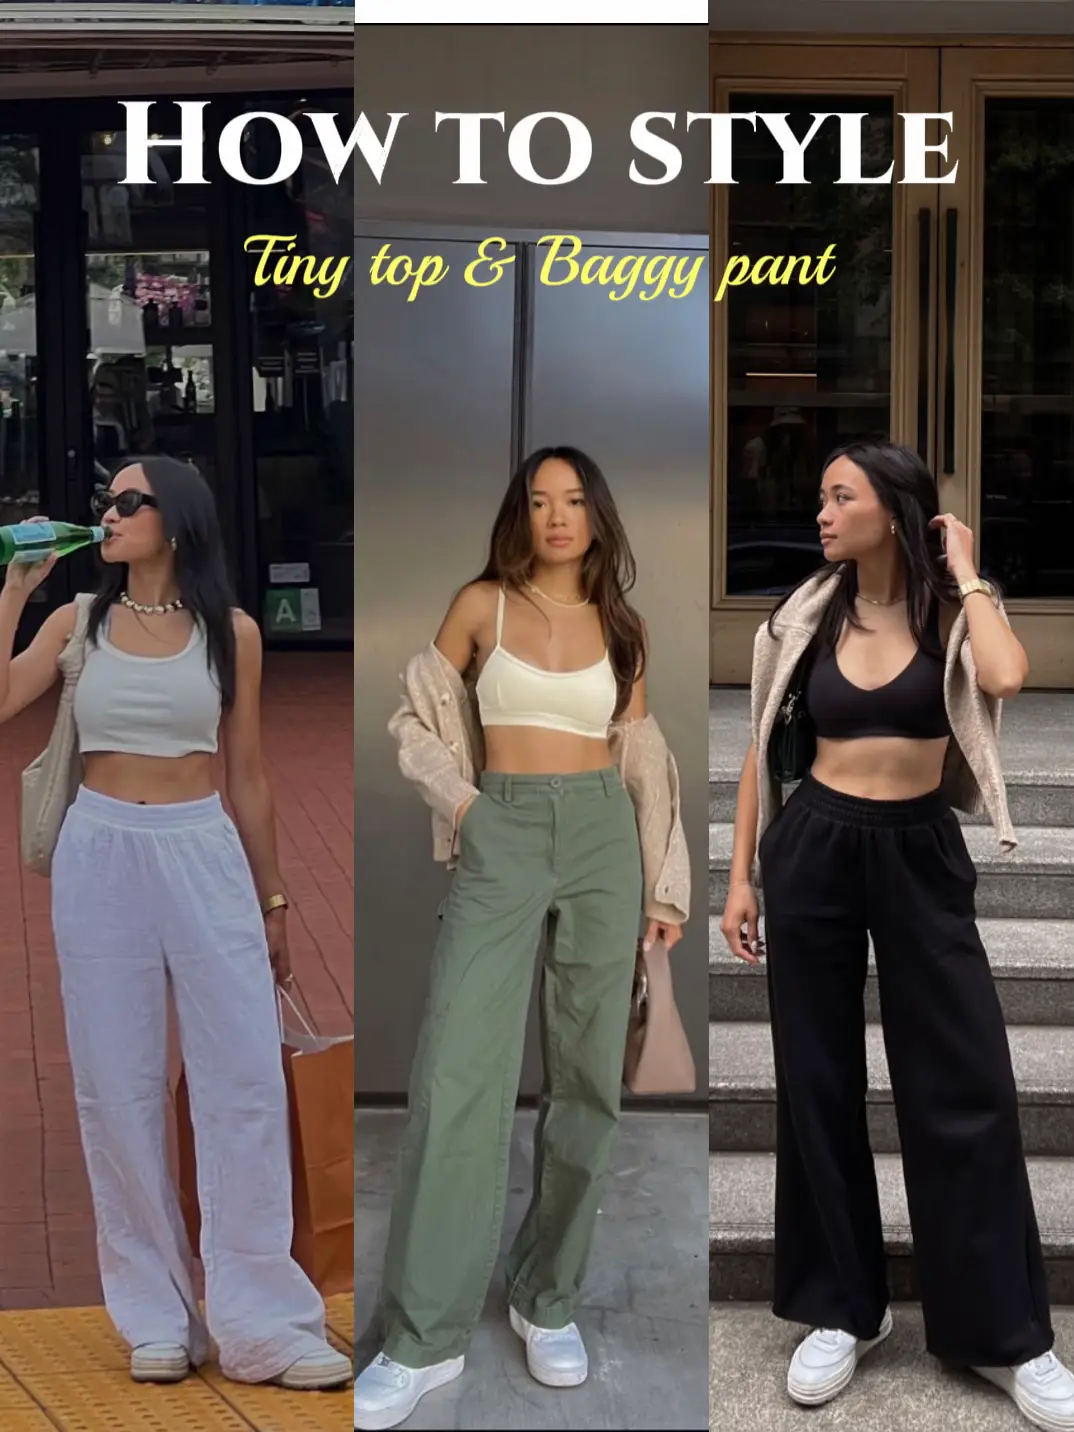 Aritzia Dupe Cargo Sweats!, Gallery posted by Brooke🤍